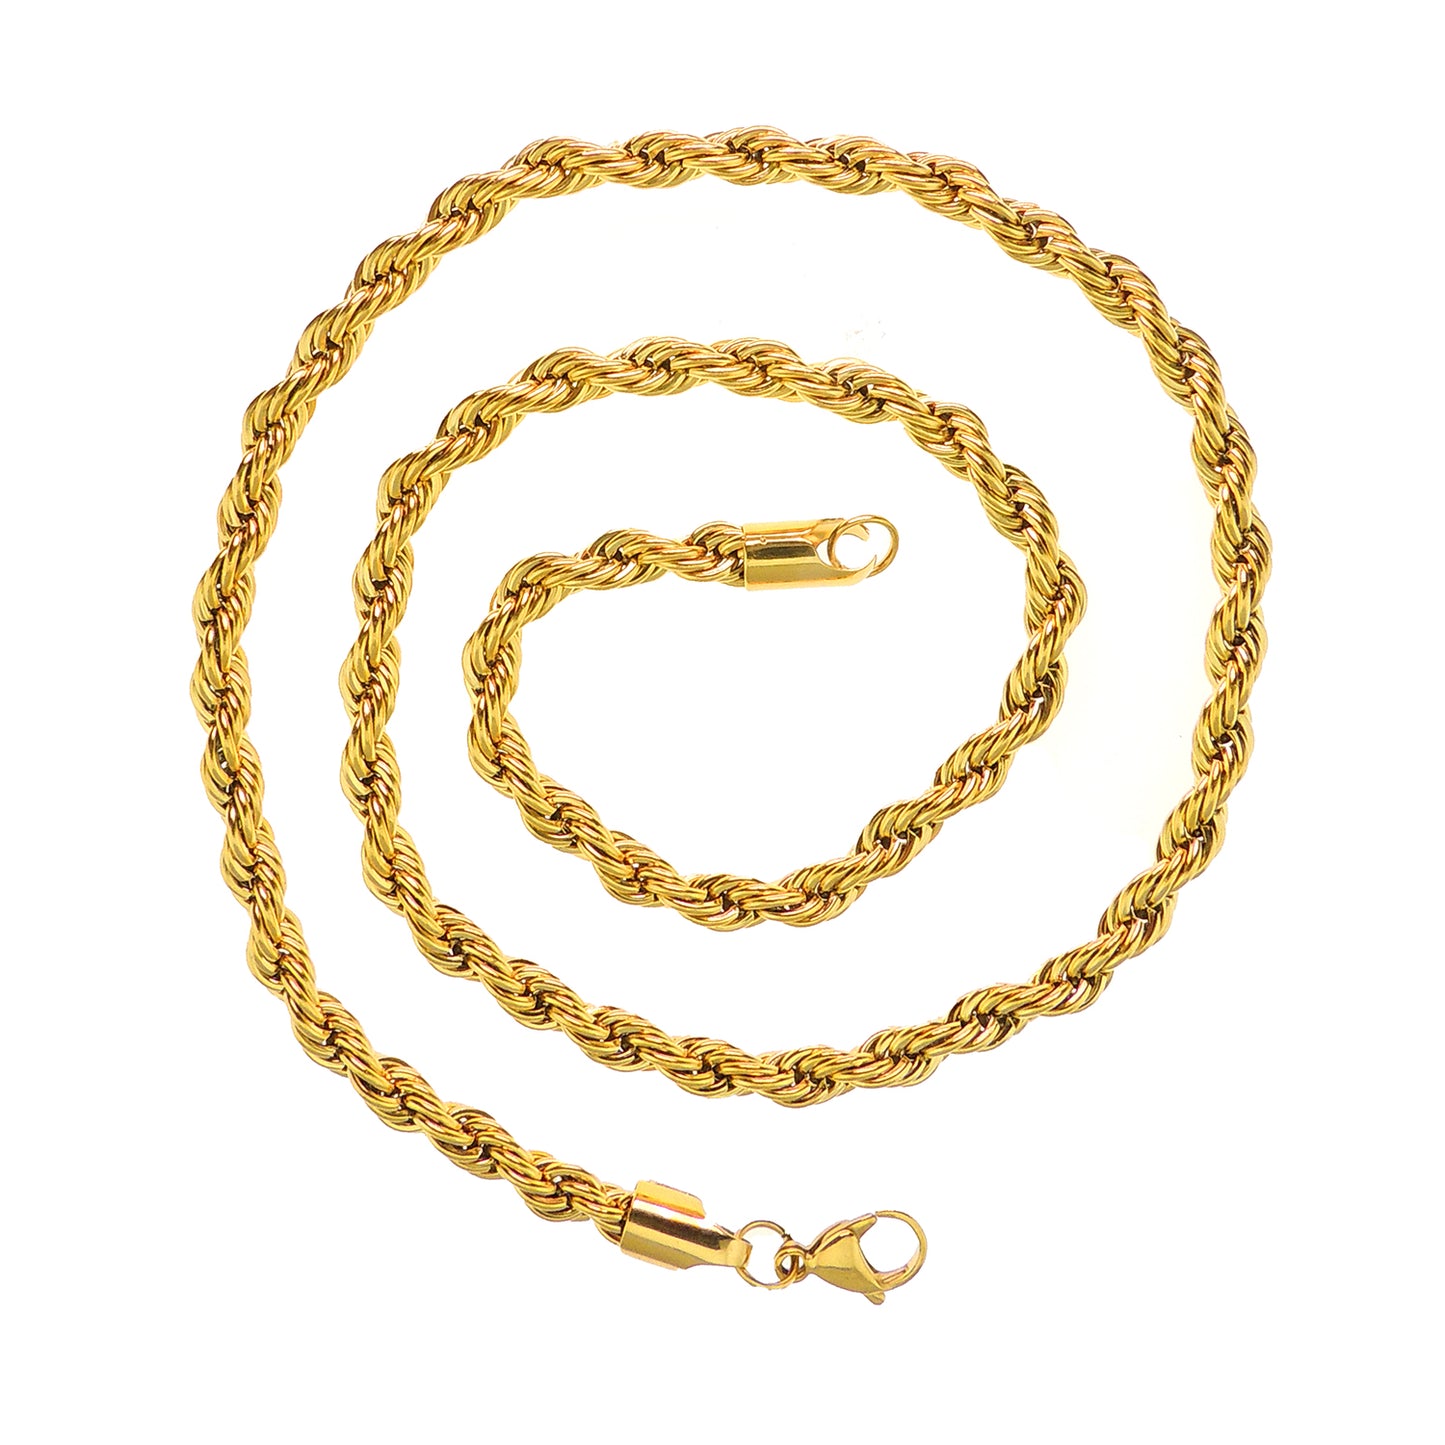 Gold Twisted Rope Chain Necklace Hip Hop Men Women Ginger Lyne Collection - 24 Inch Gold